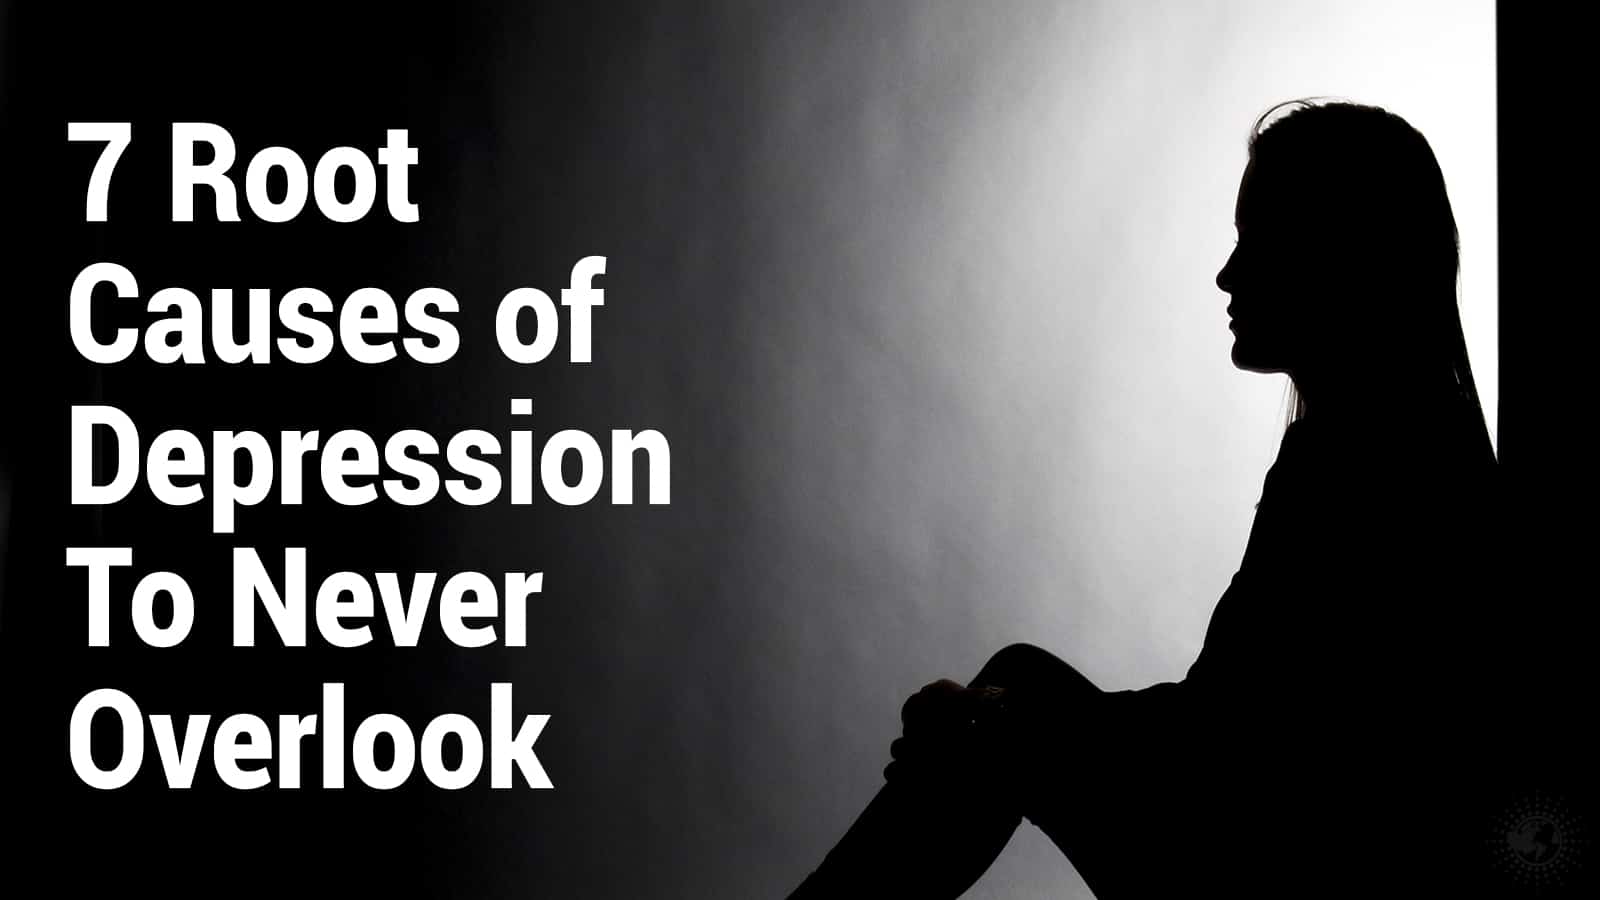 7 Root Causes of Depression To Never Overlook